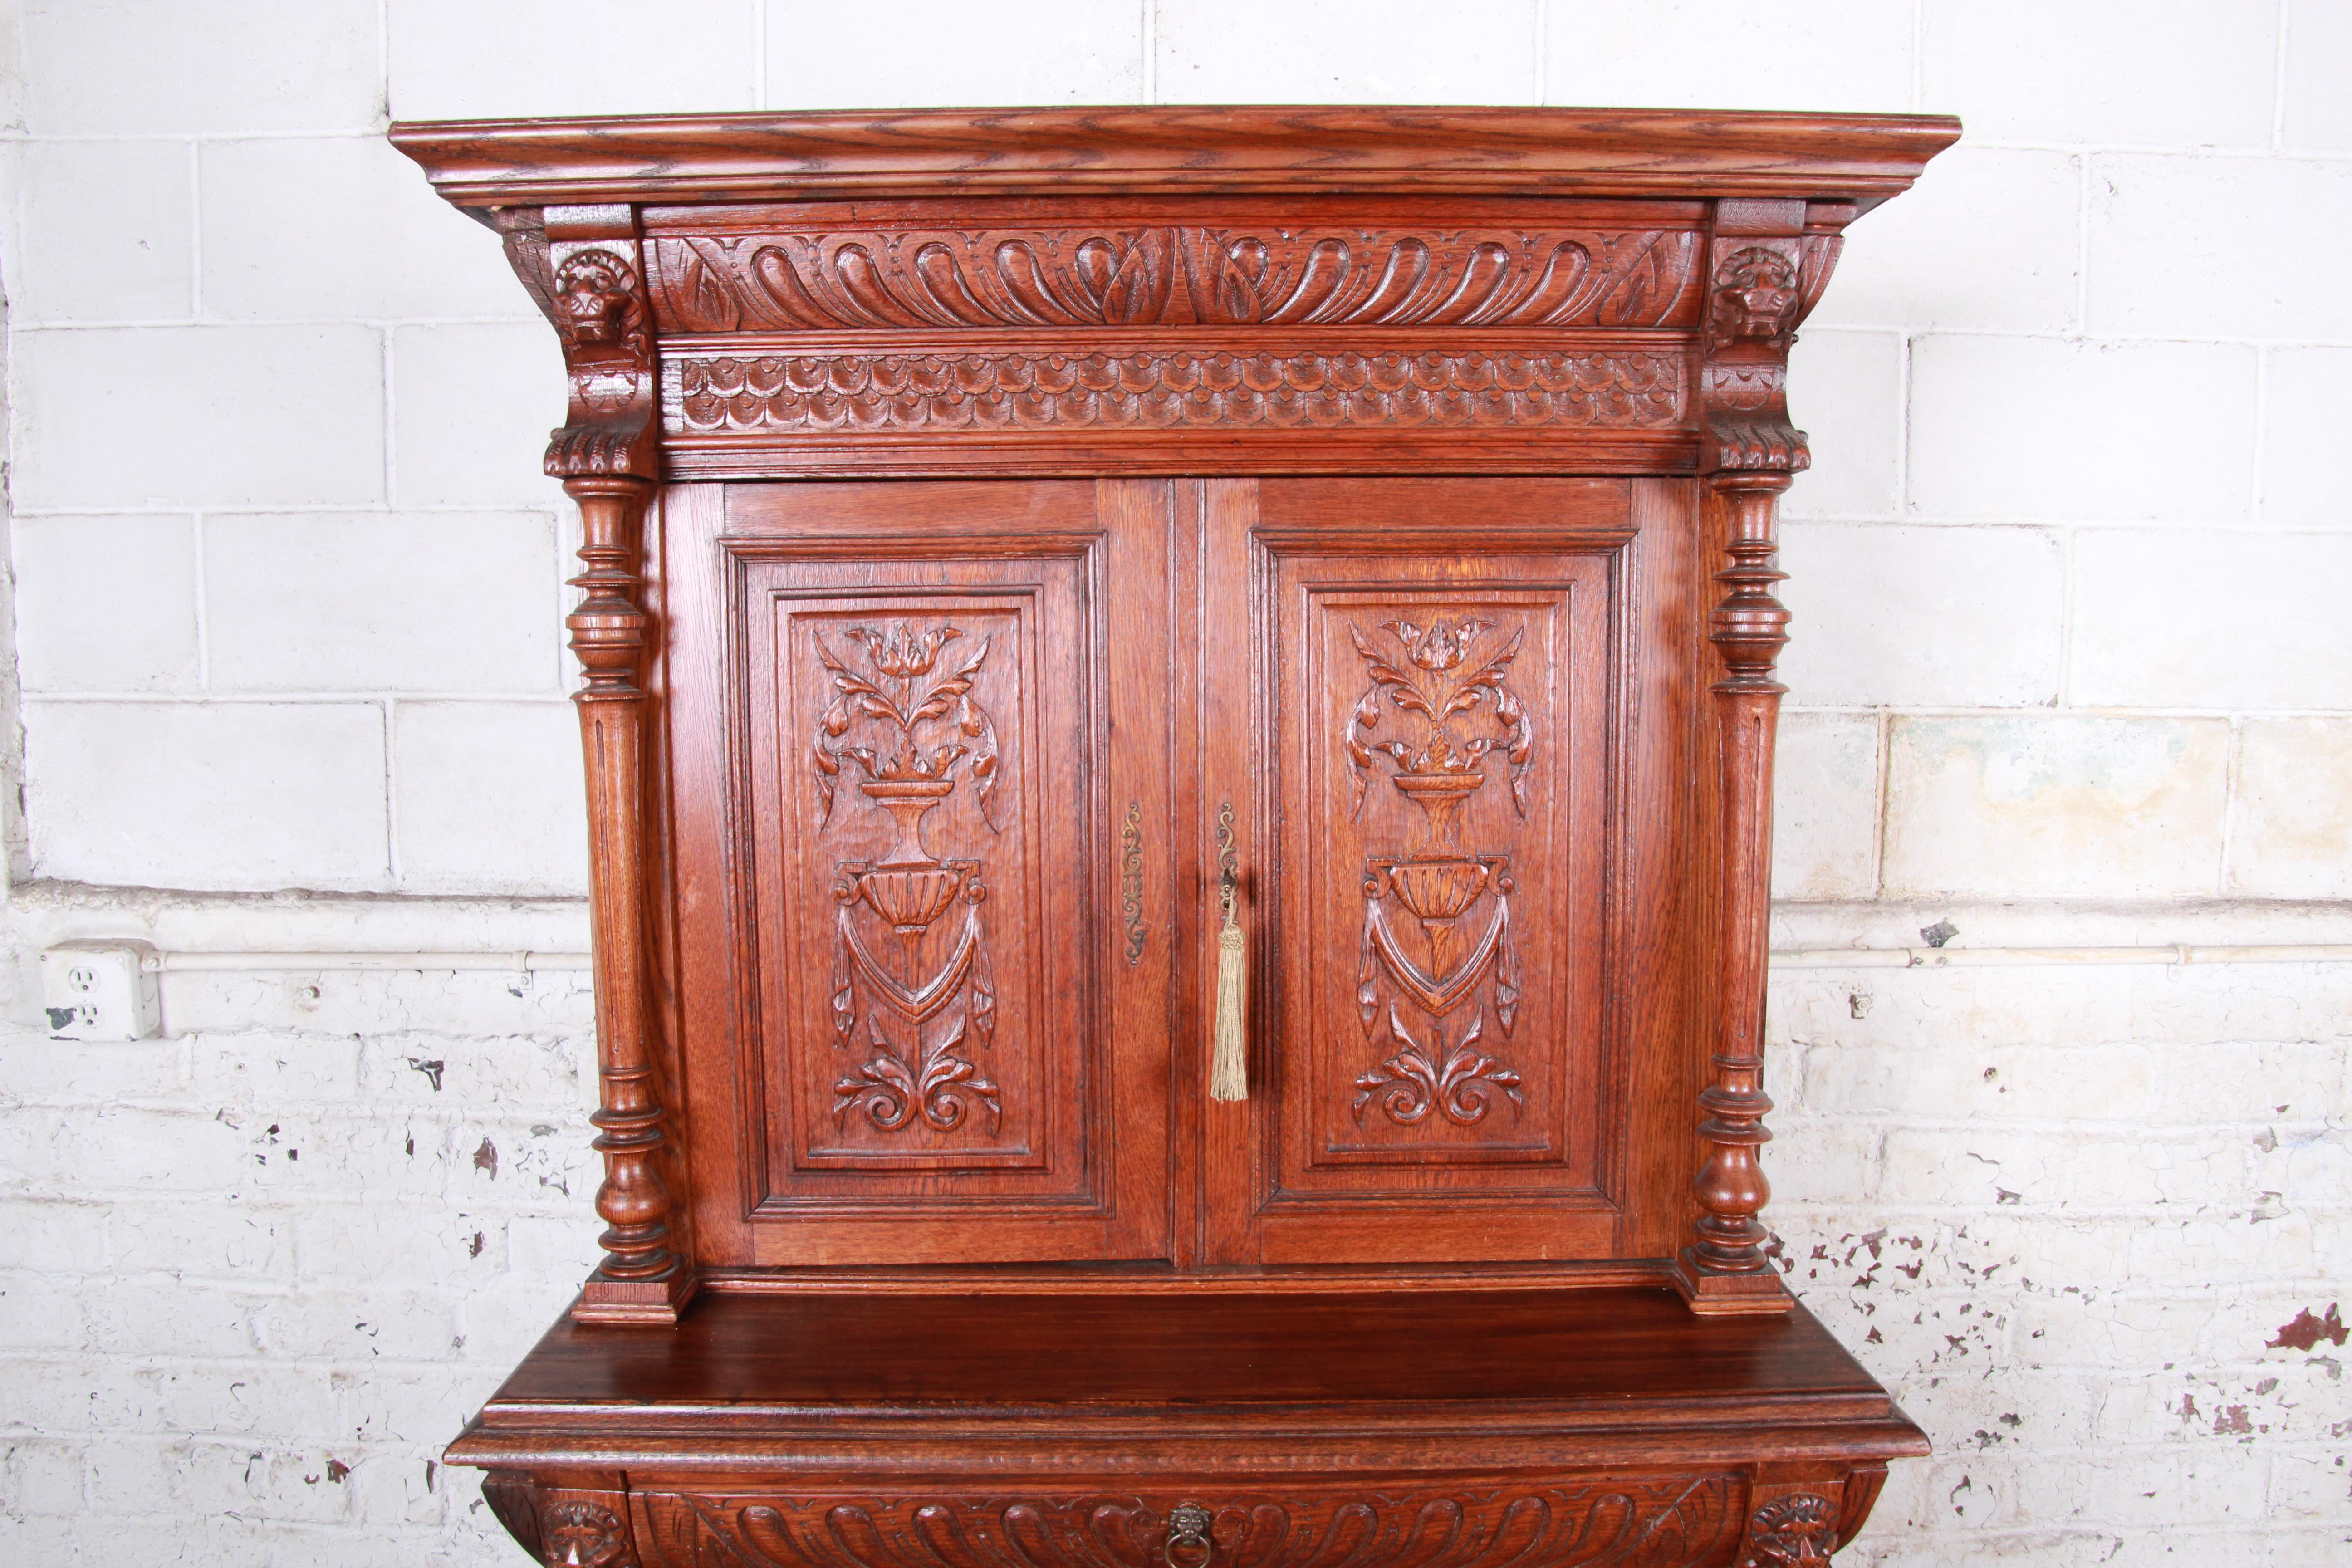 20th Century Ornate Carved Oak French Sideboard Bar Cabinet with Lion Figures, circa 1900